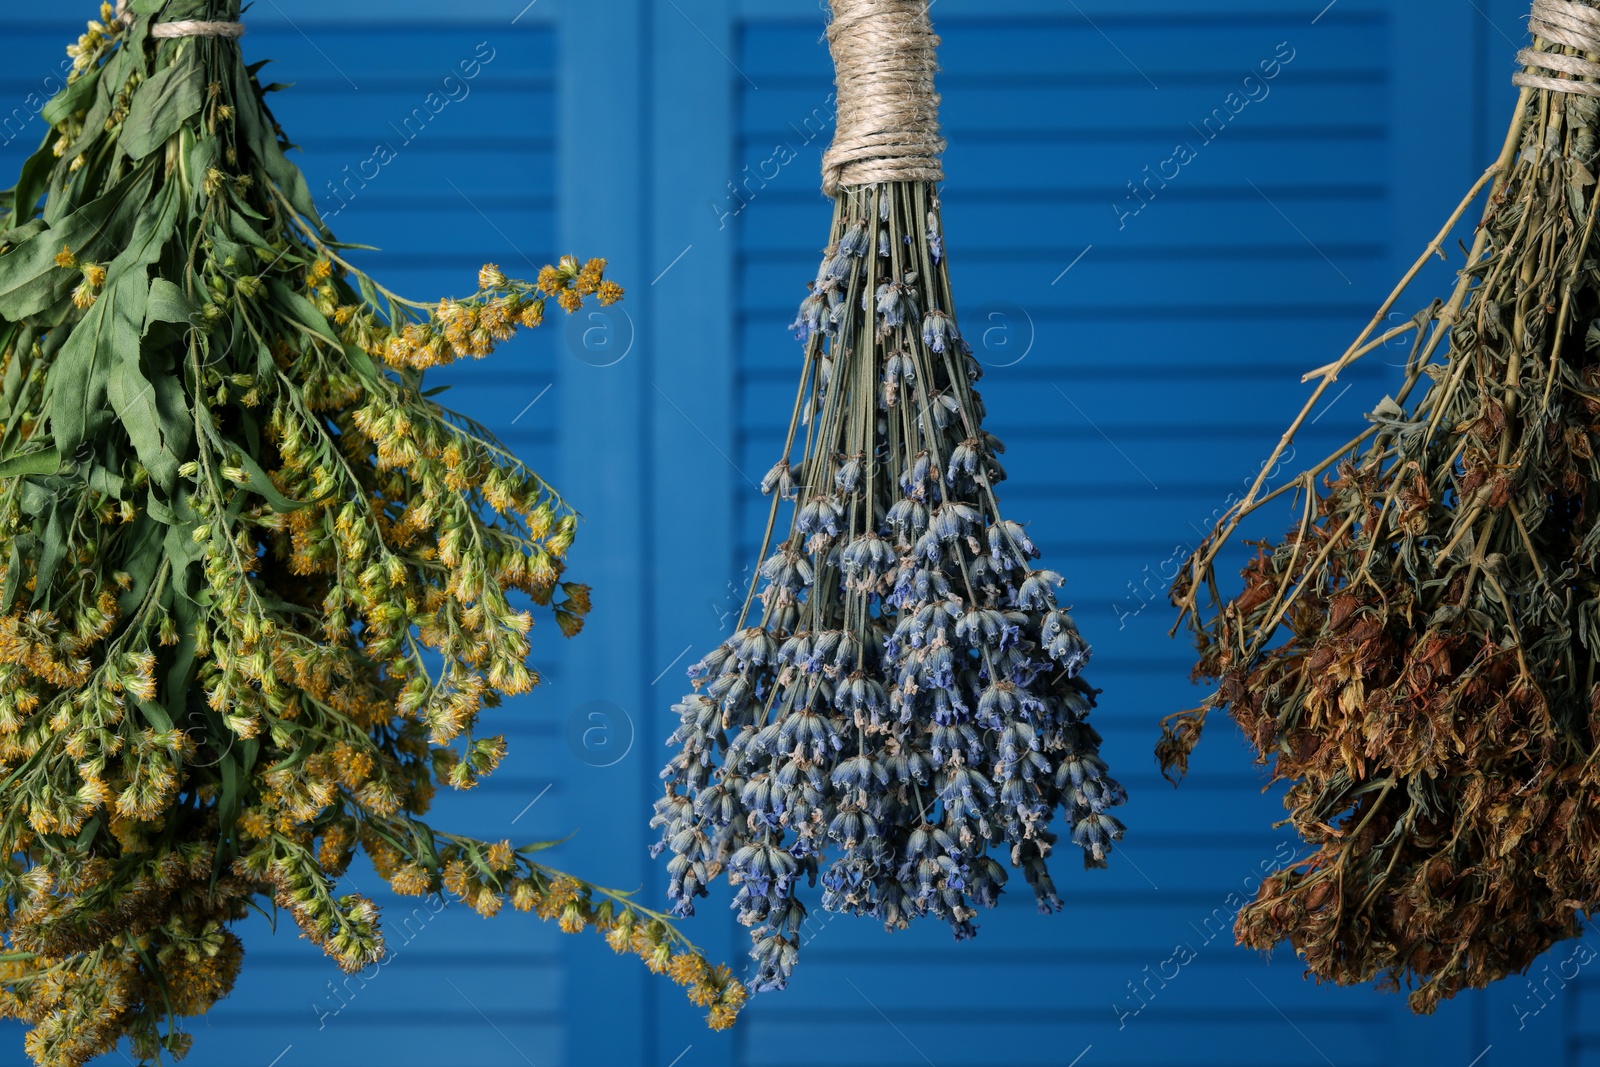 Photo of Bunches of different dry herbs hanging on blue background